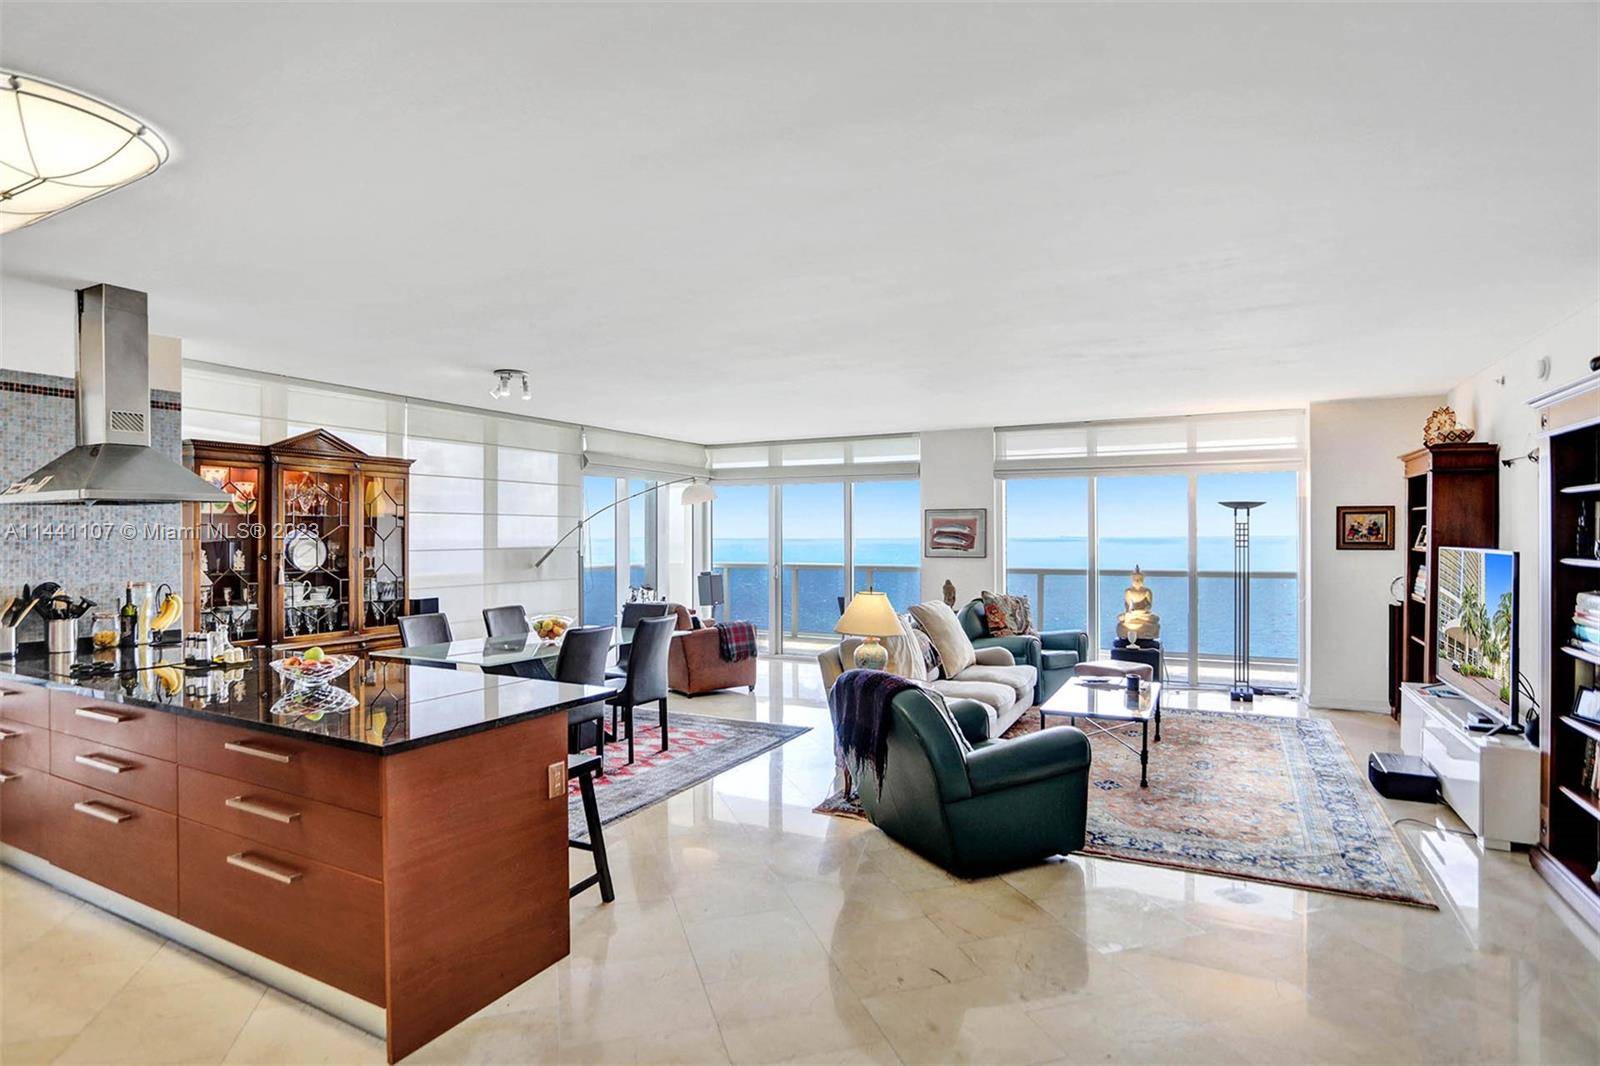 From the moment you walk in you will experience incredible breathtaking views of the ocean !